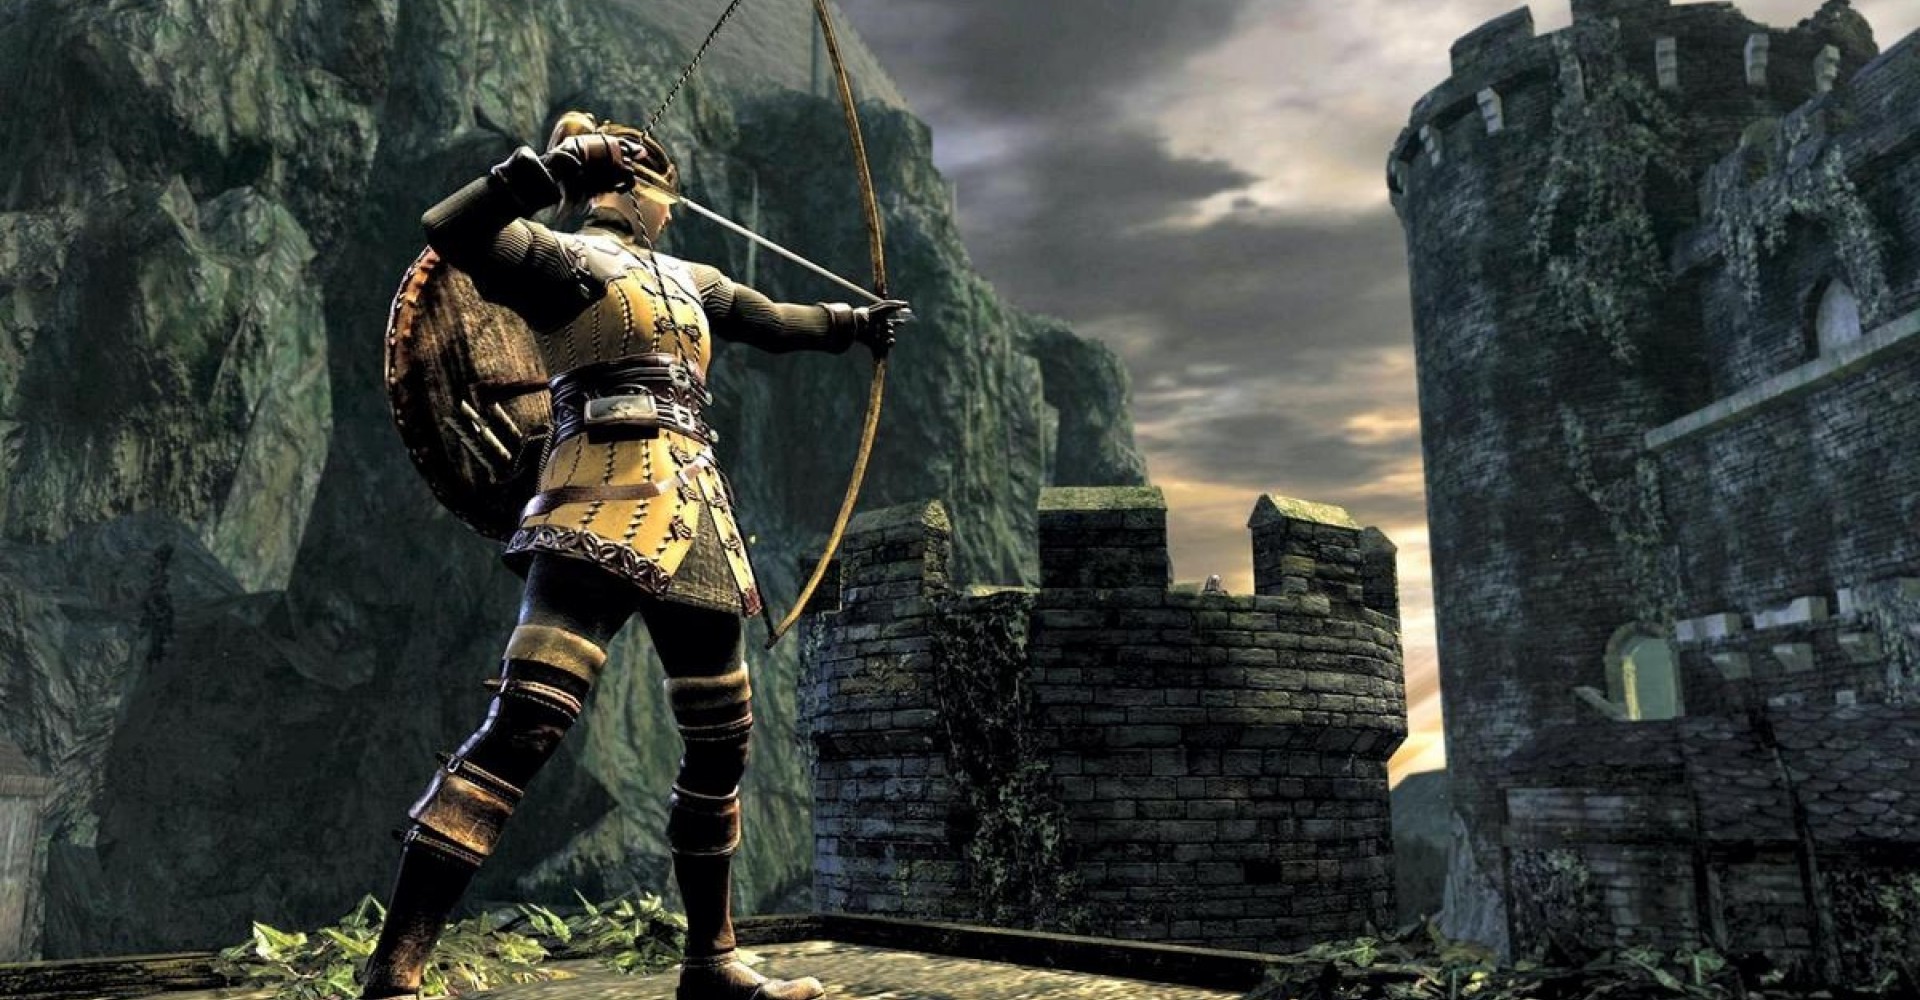 [REPOST] FEATURE: PORT MASTERS VIRTUOS ON BRINGING DARK SOULS: REMASTERED  TO SWITCH AND FUTURE PROJECTS - Virtuos